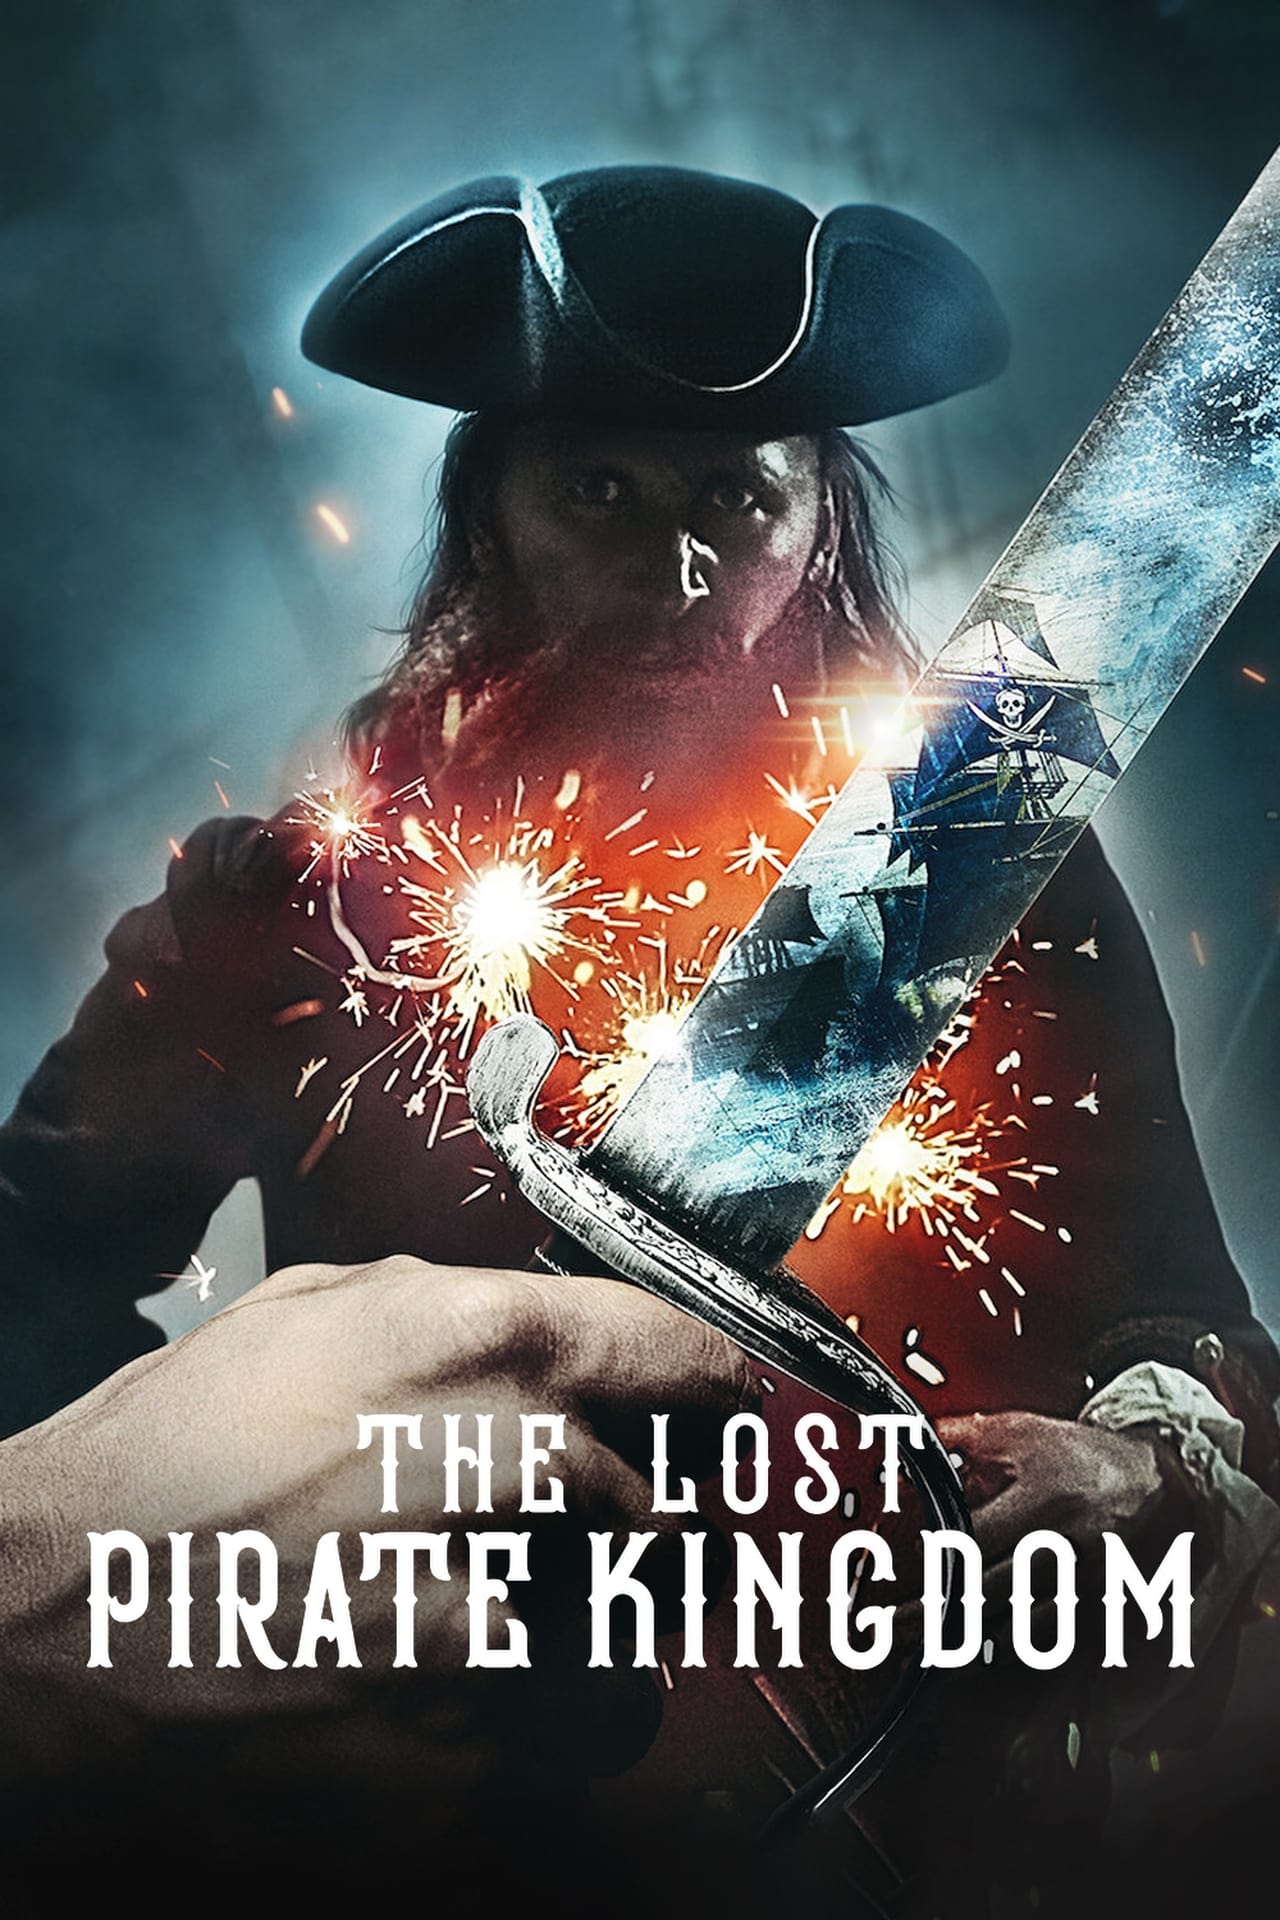 The Lost Pirate Kingdom (2021) S1 EP6 Dead or Alive 640Kbps 25Fps 48Khz 5.1Ch DD+ NF E-AC3 Turkish Audio TAC